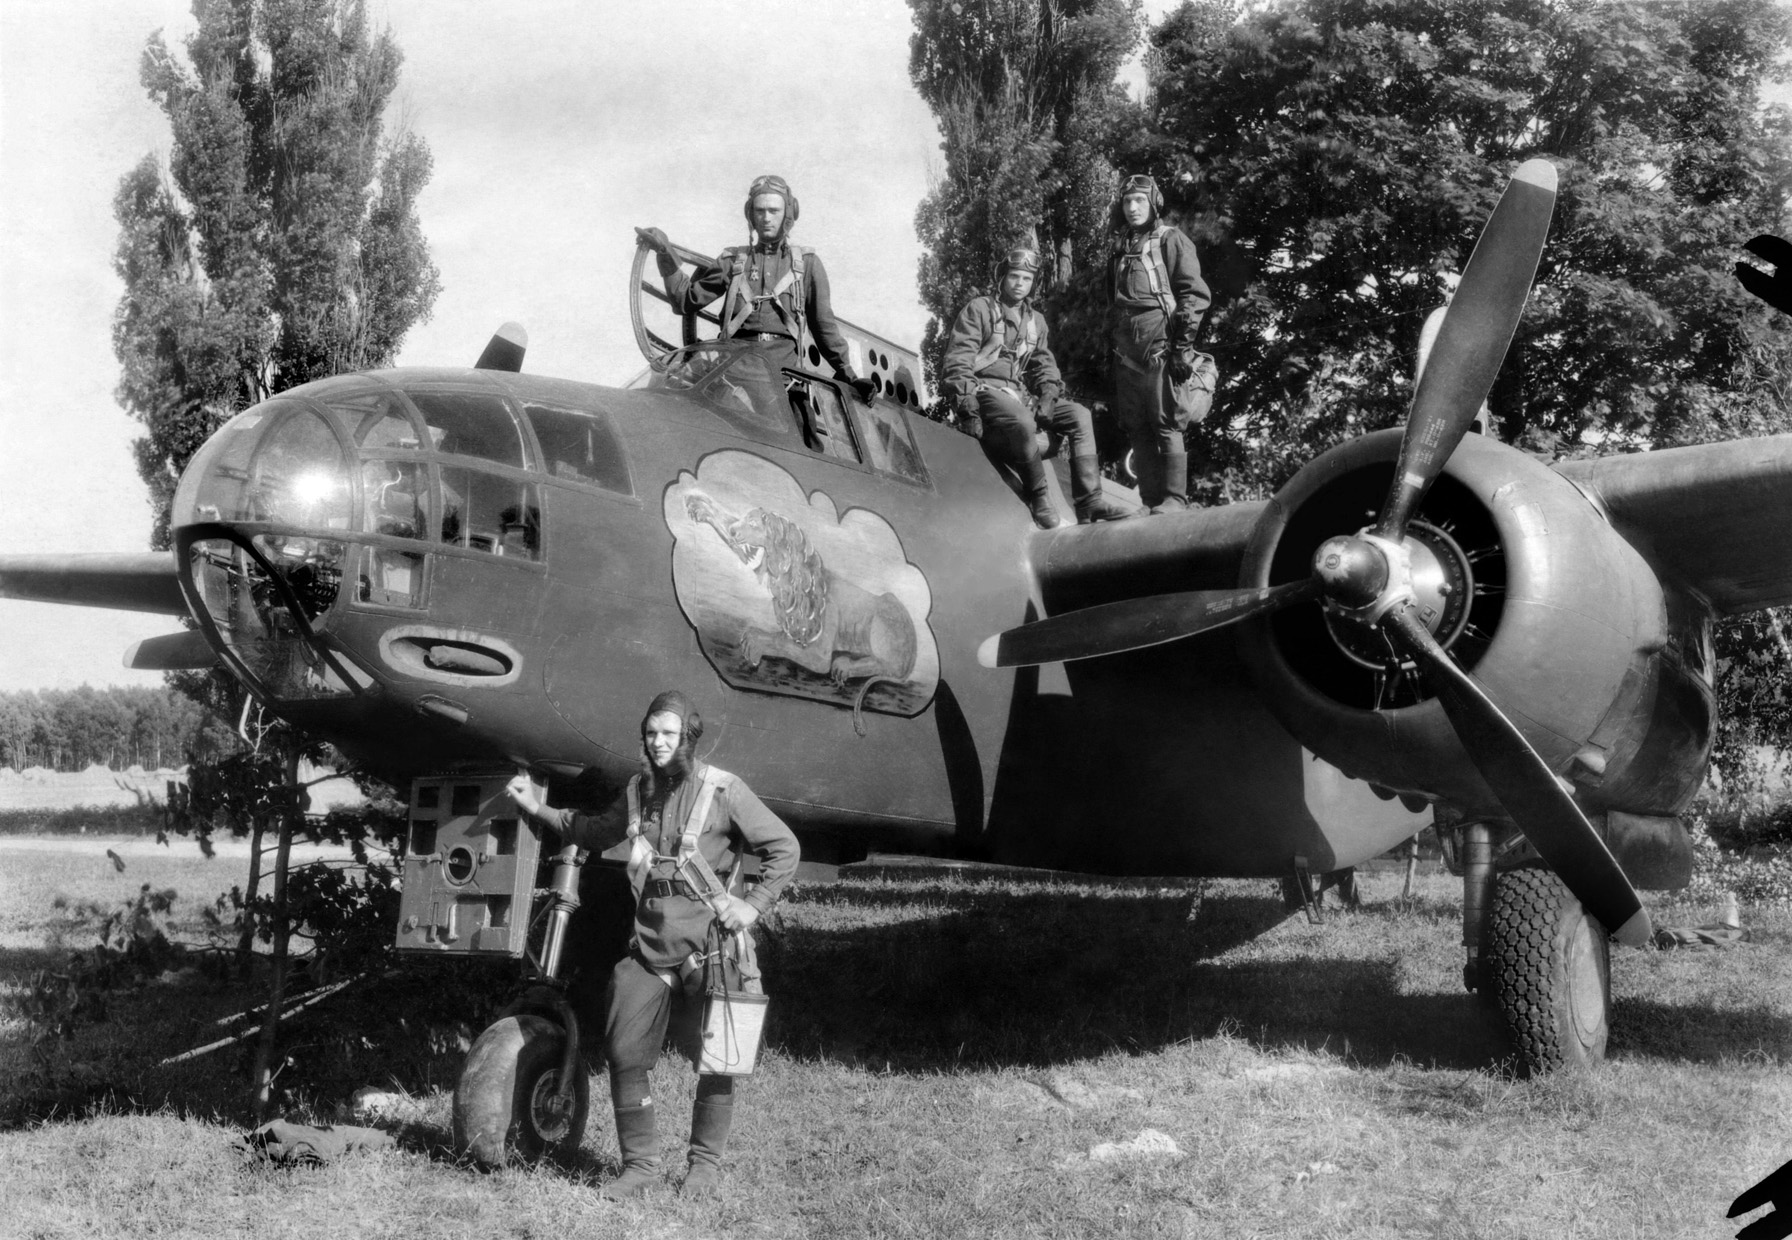 As a Lend-Lease aircraft, the Douglas A-20 Havoc, also known as the Boston, proved an exceptionally effective weapon against Axis shipping while in the hands of Soviet aircrews.